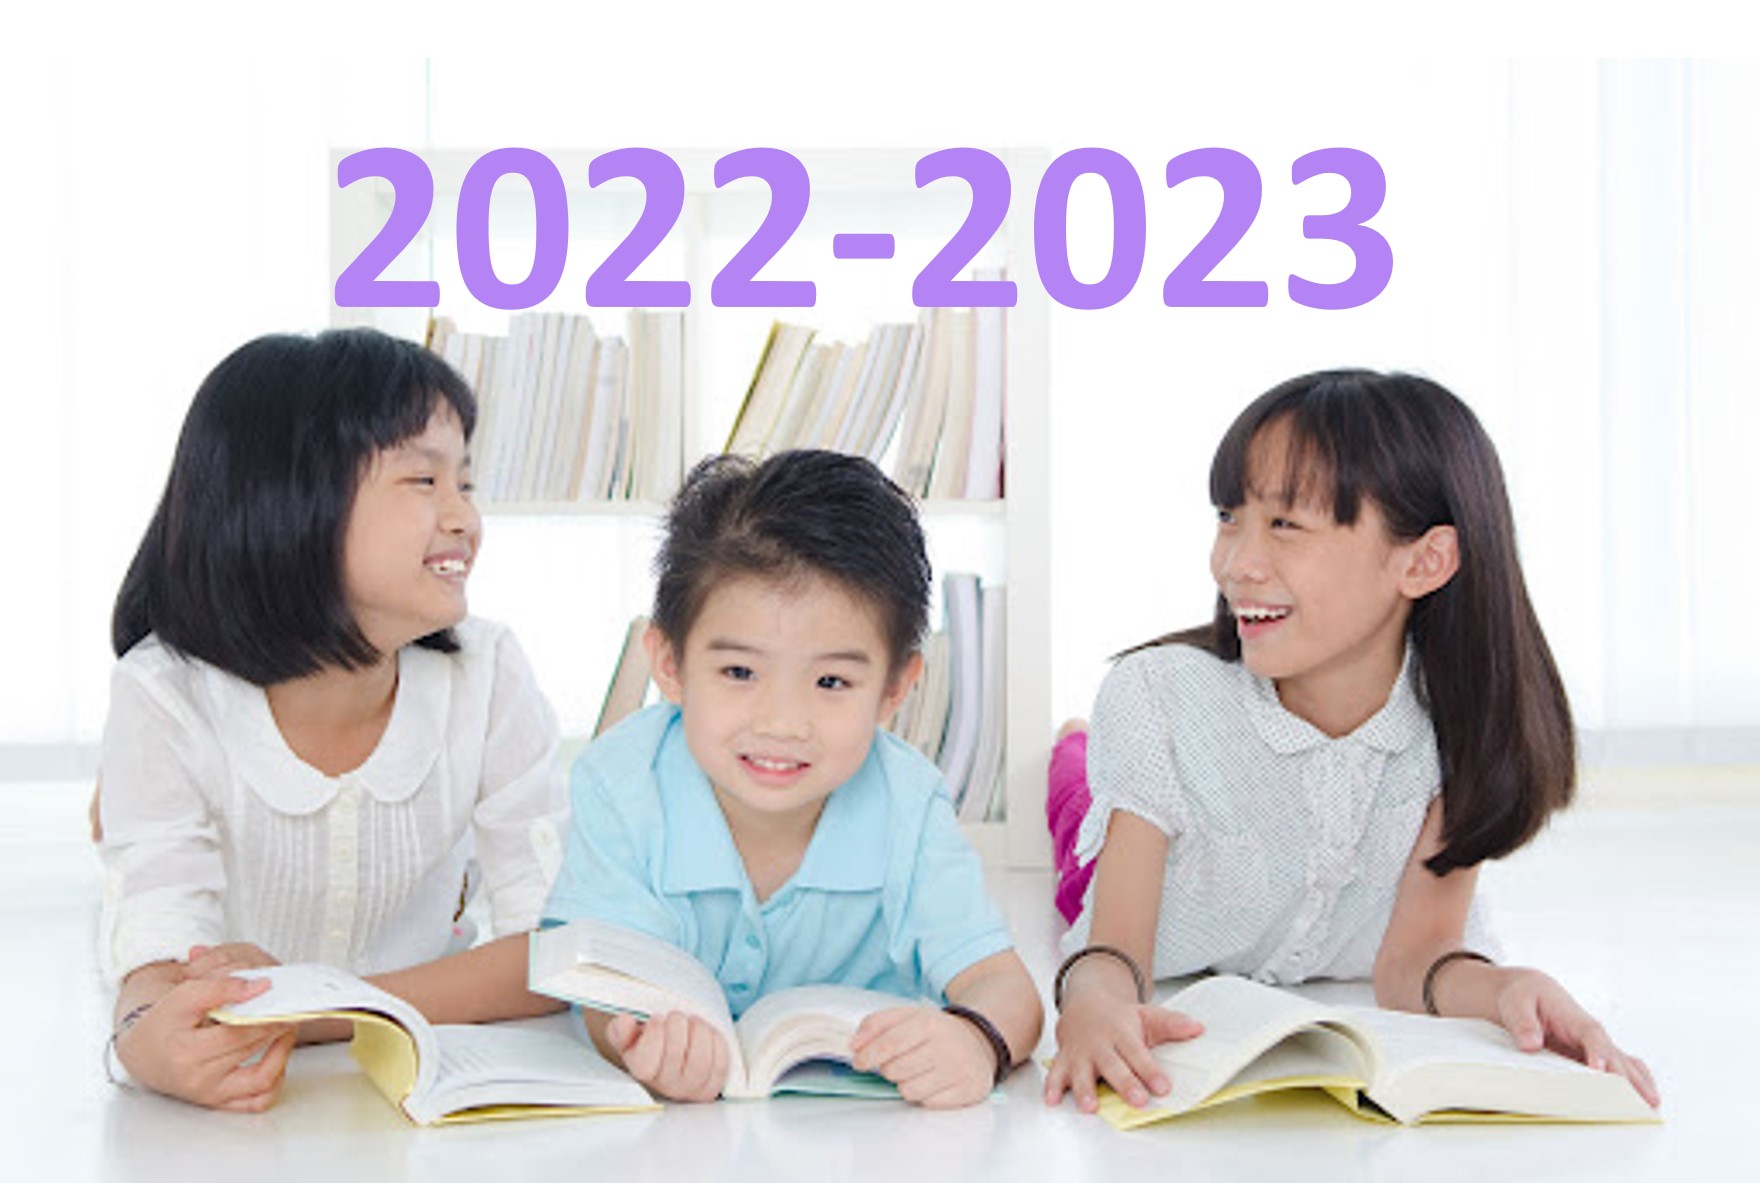 MOISchool Course Introduction 2022-2023